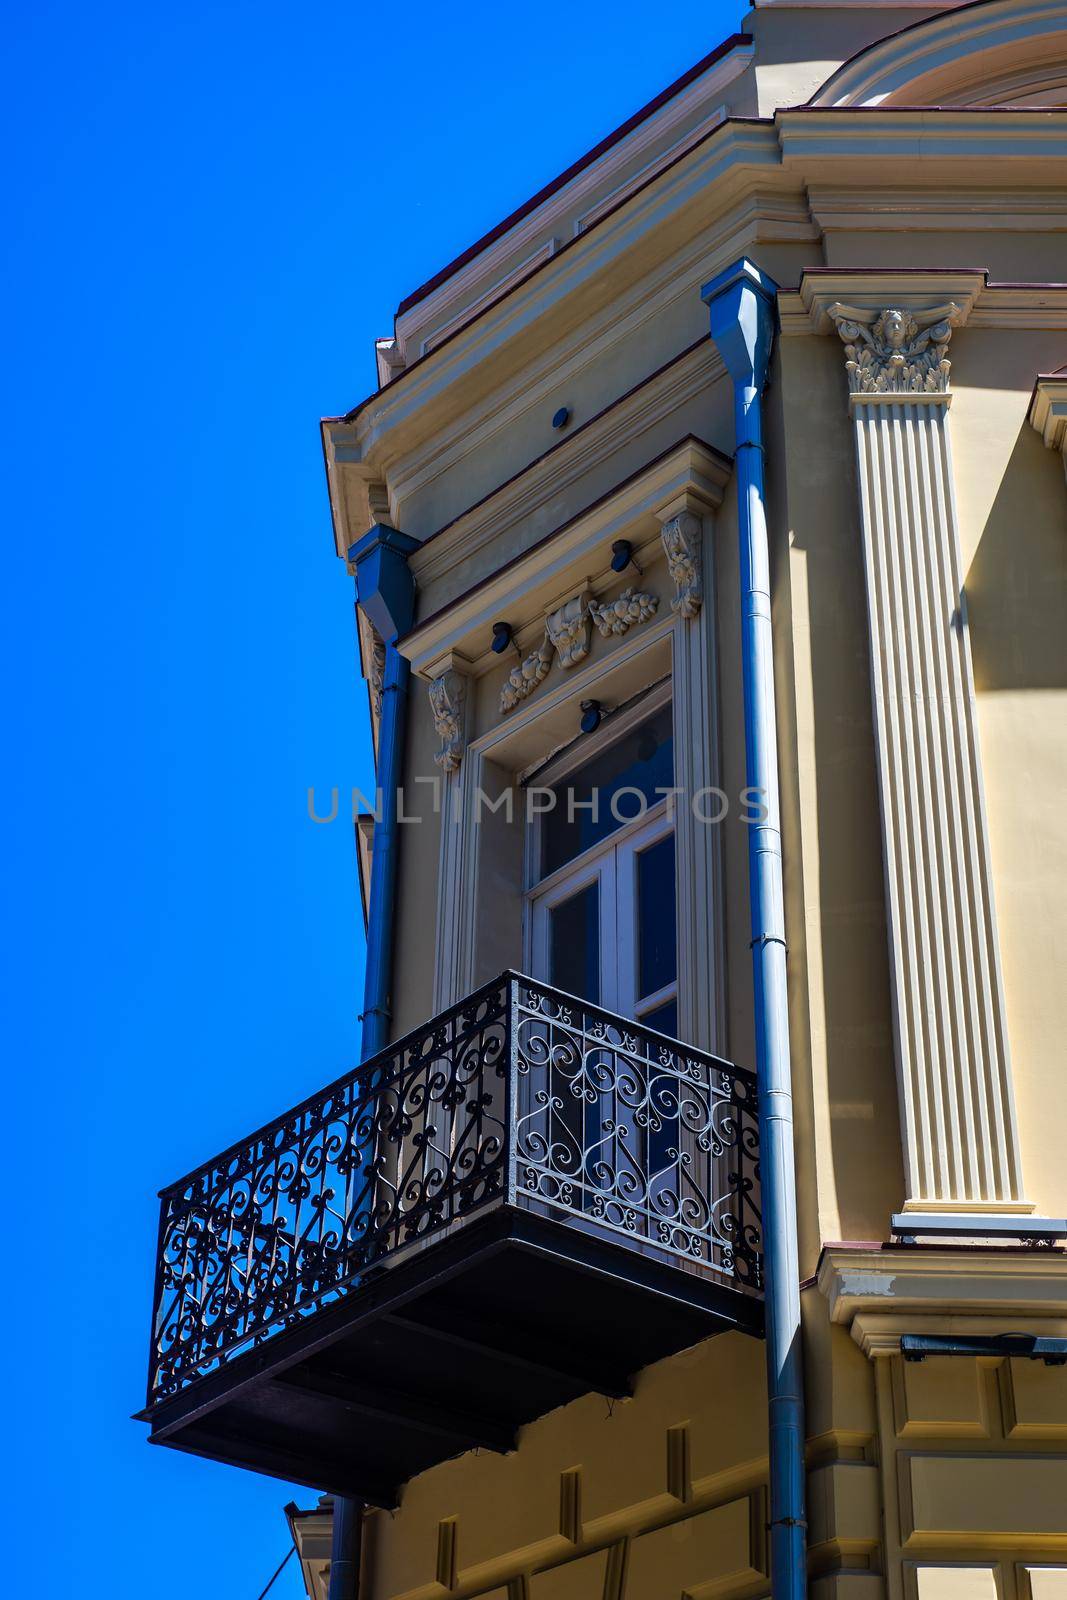 Architecture of oldest historical part of Tbilisi, capital city of Georgia